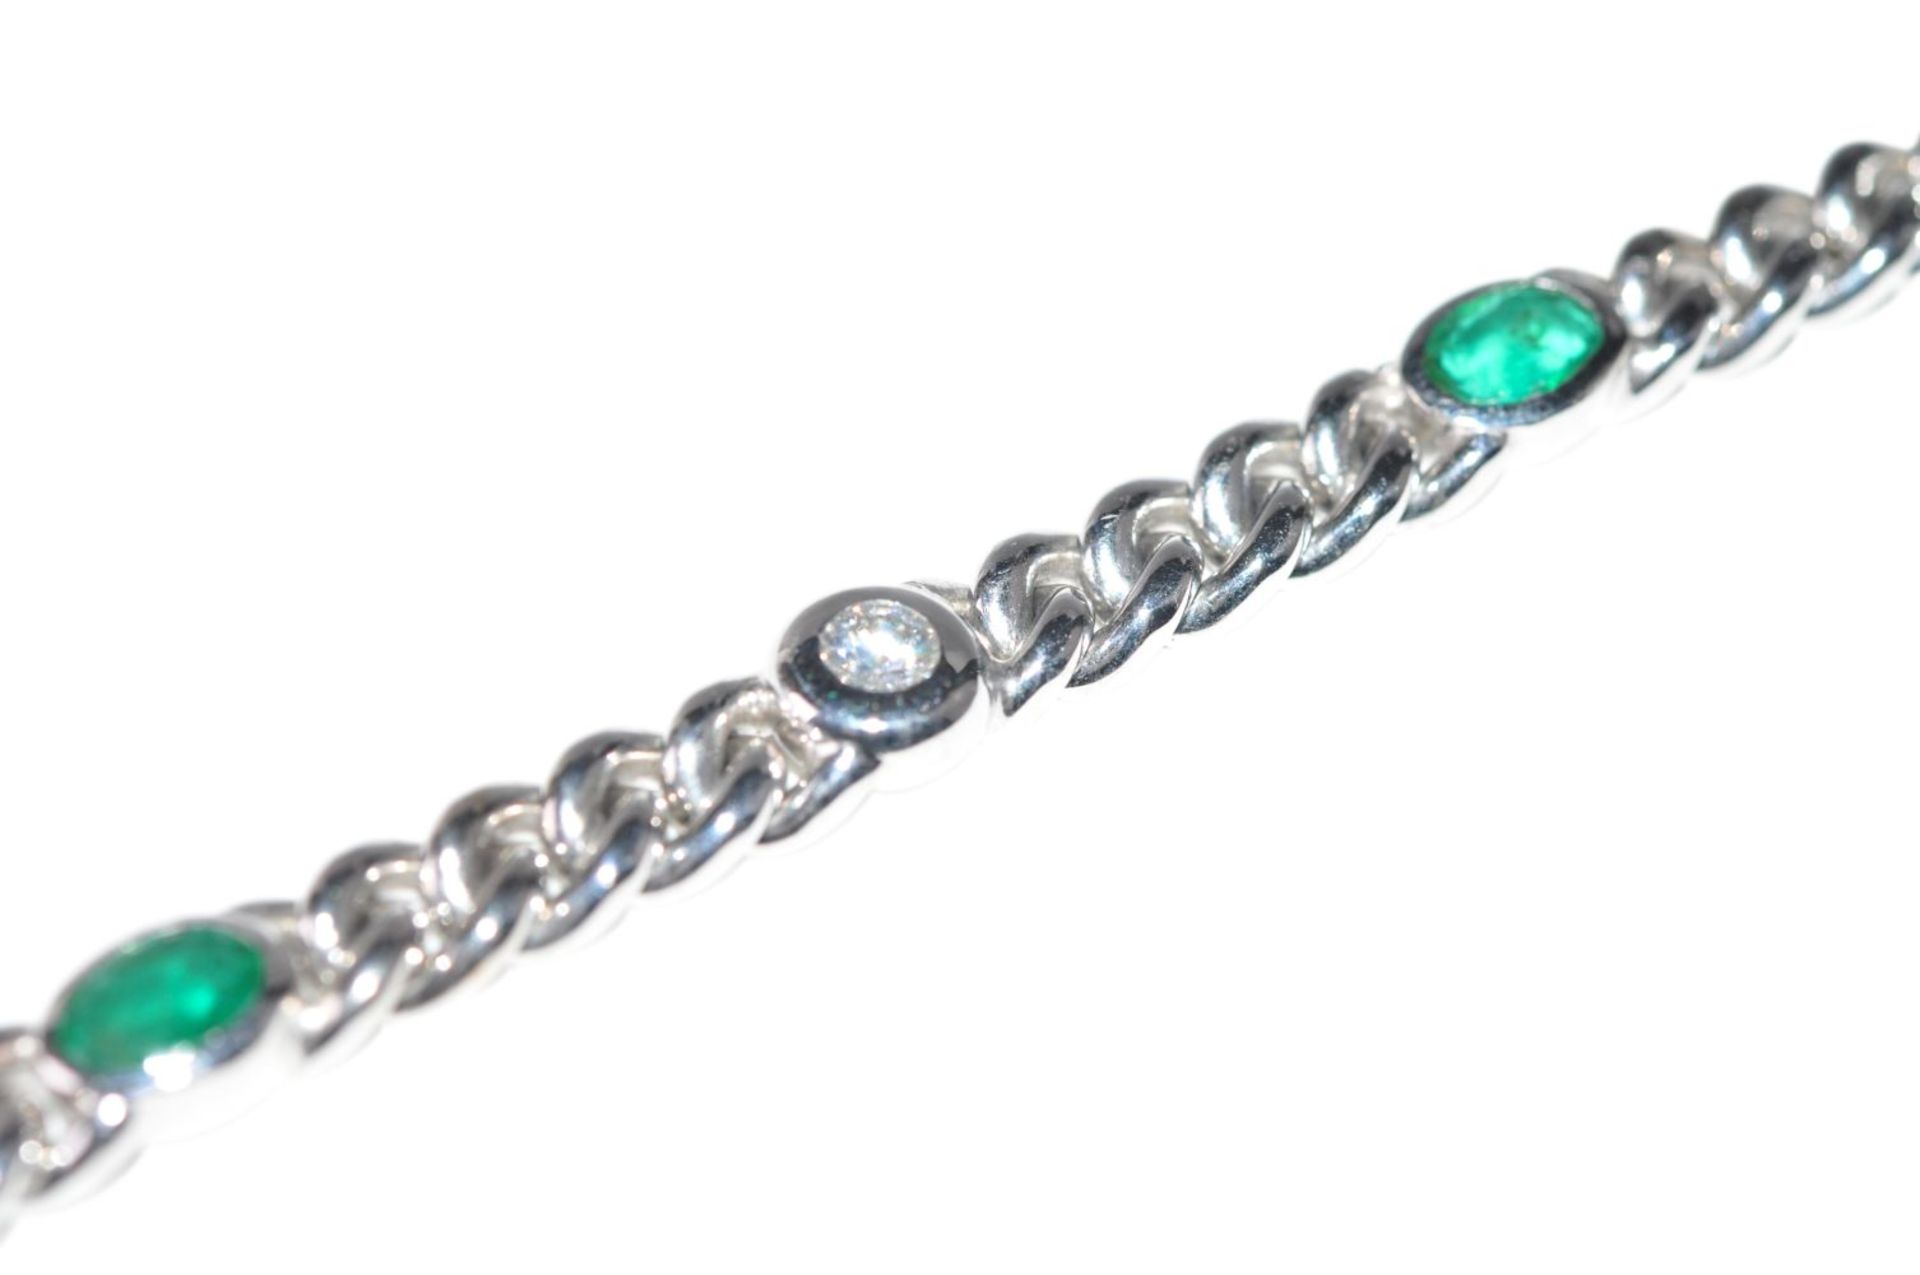 Bracelet18Kt white gold Bracelet with diamonds total carat weight approx. 0.74ct and emeralds, - Bild 2 aus 3